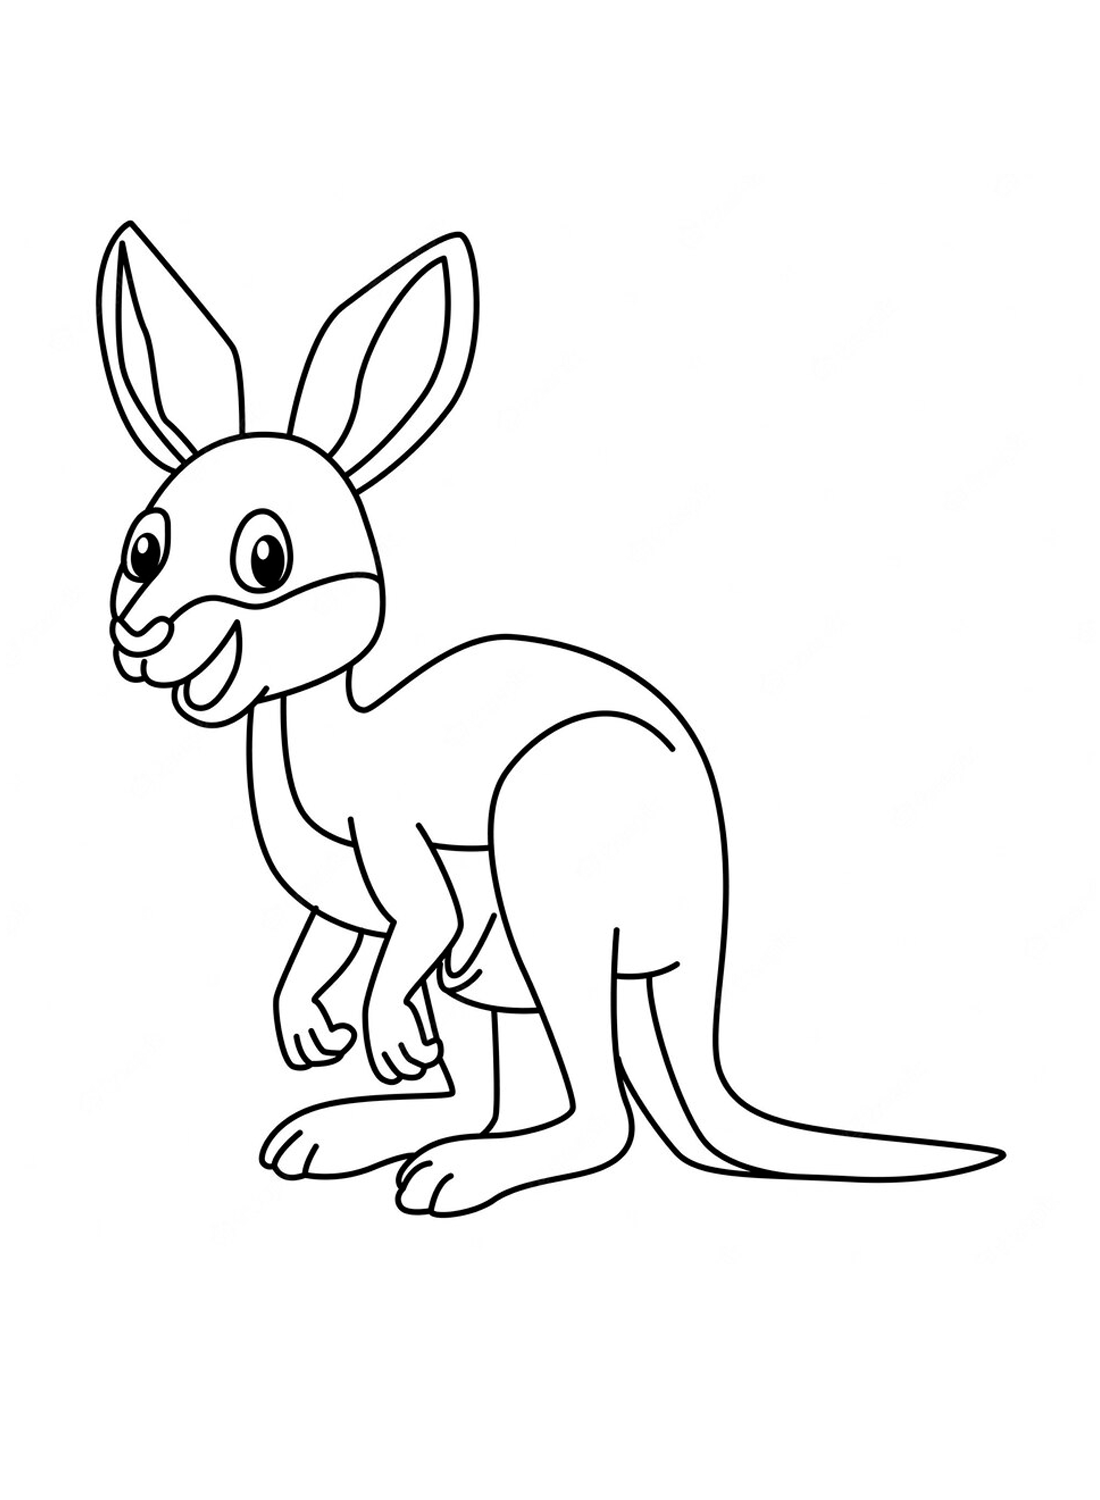 Simple Easy Kangaroo Coloring Pages